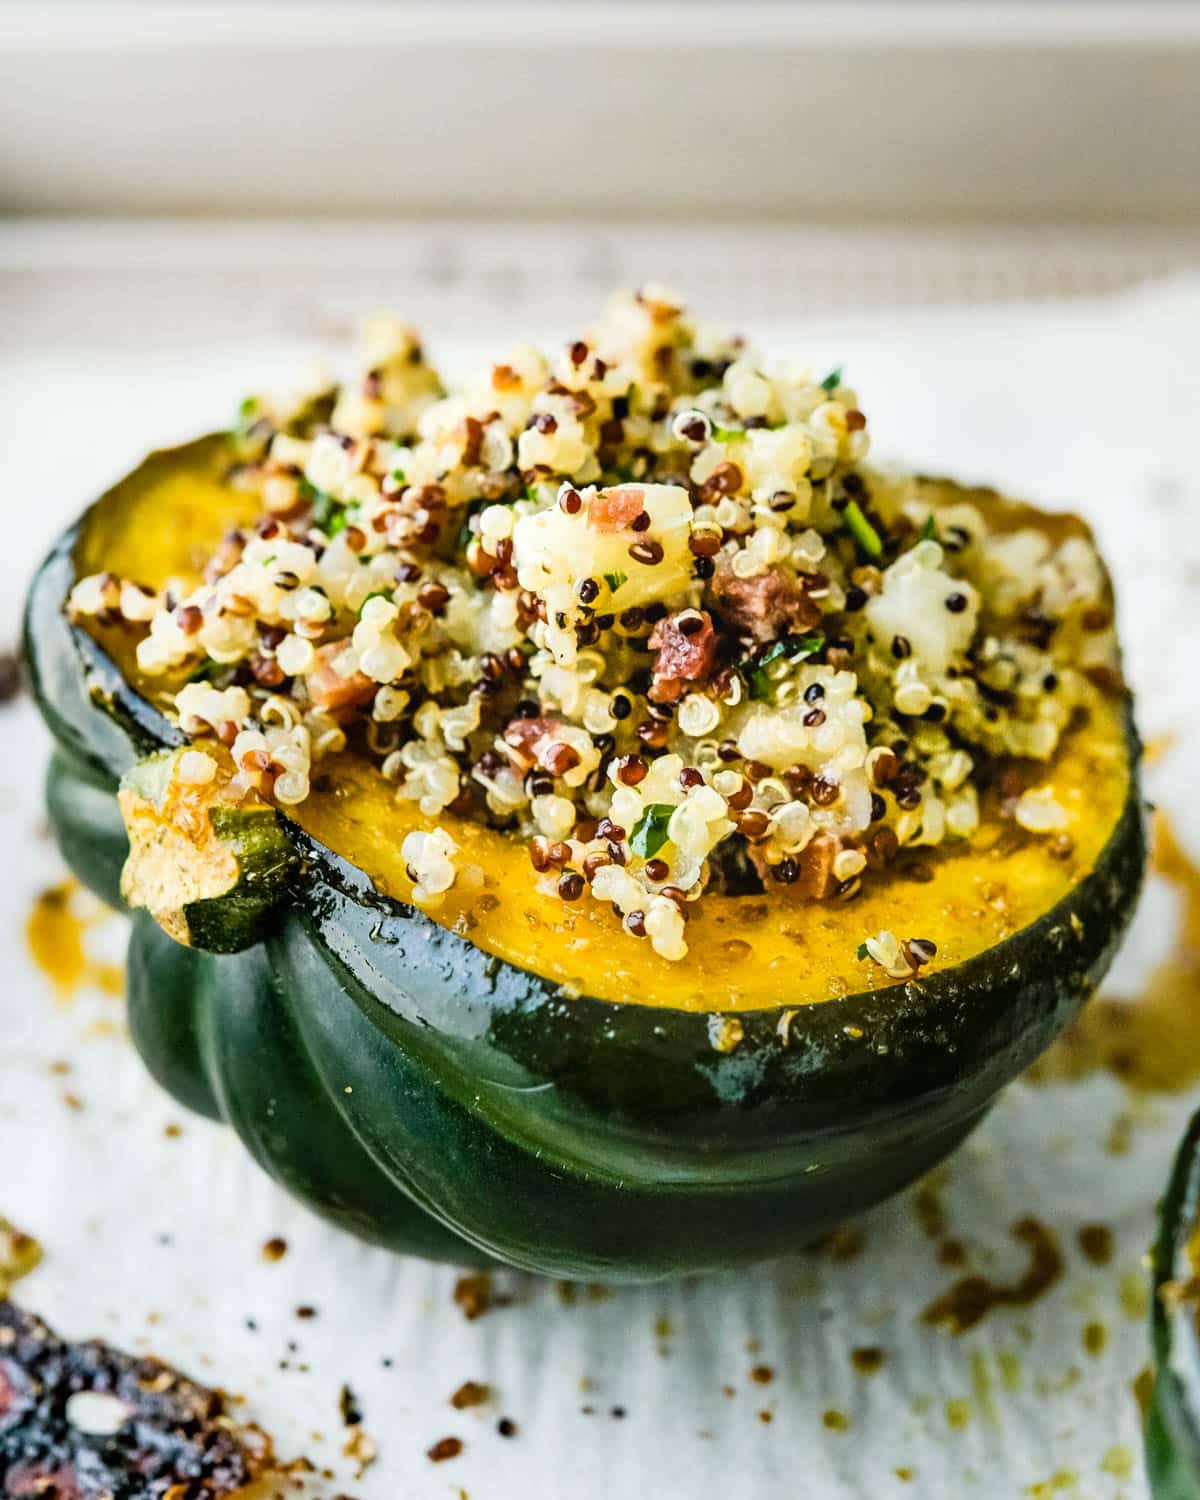 I was stuffing the squash with the quinoa apple filling.